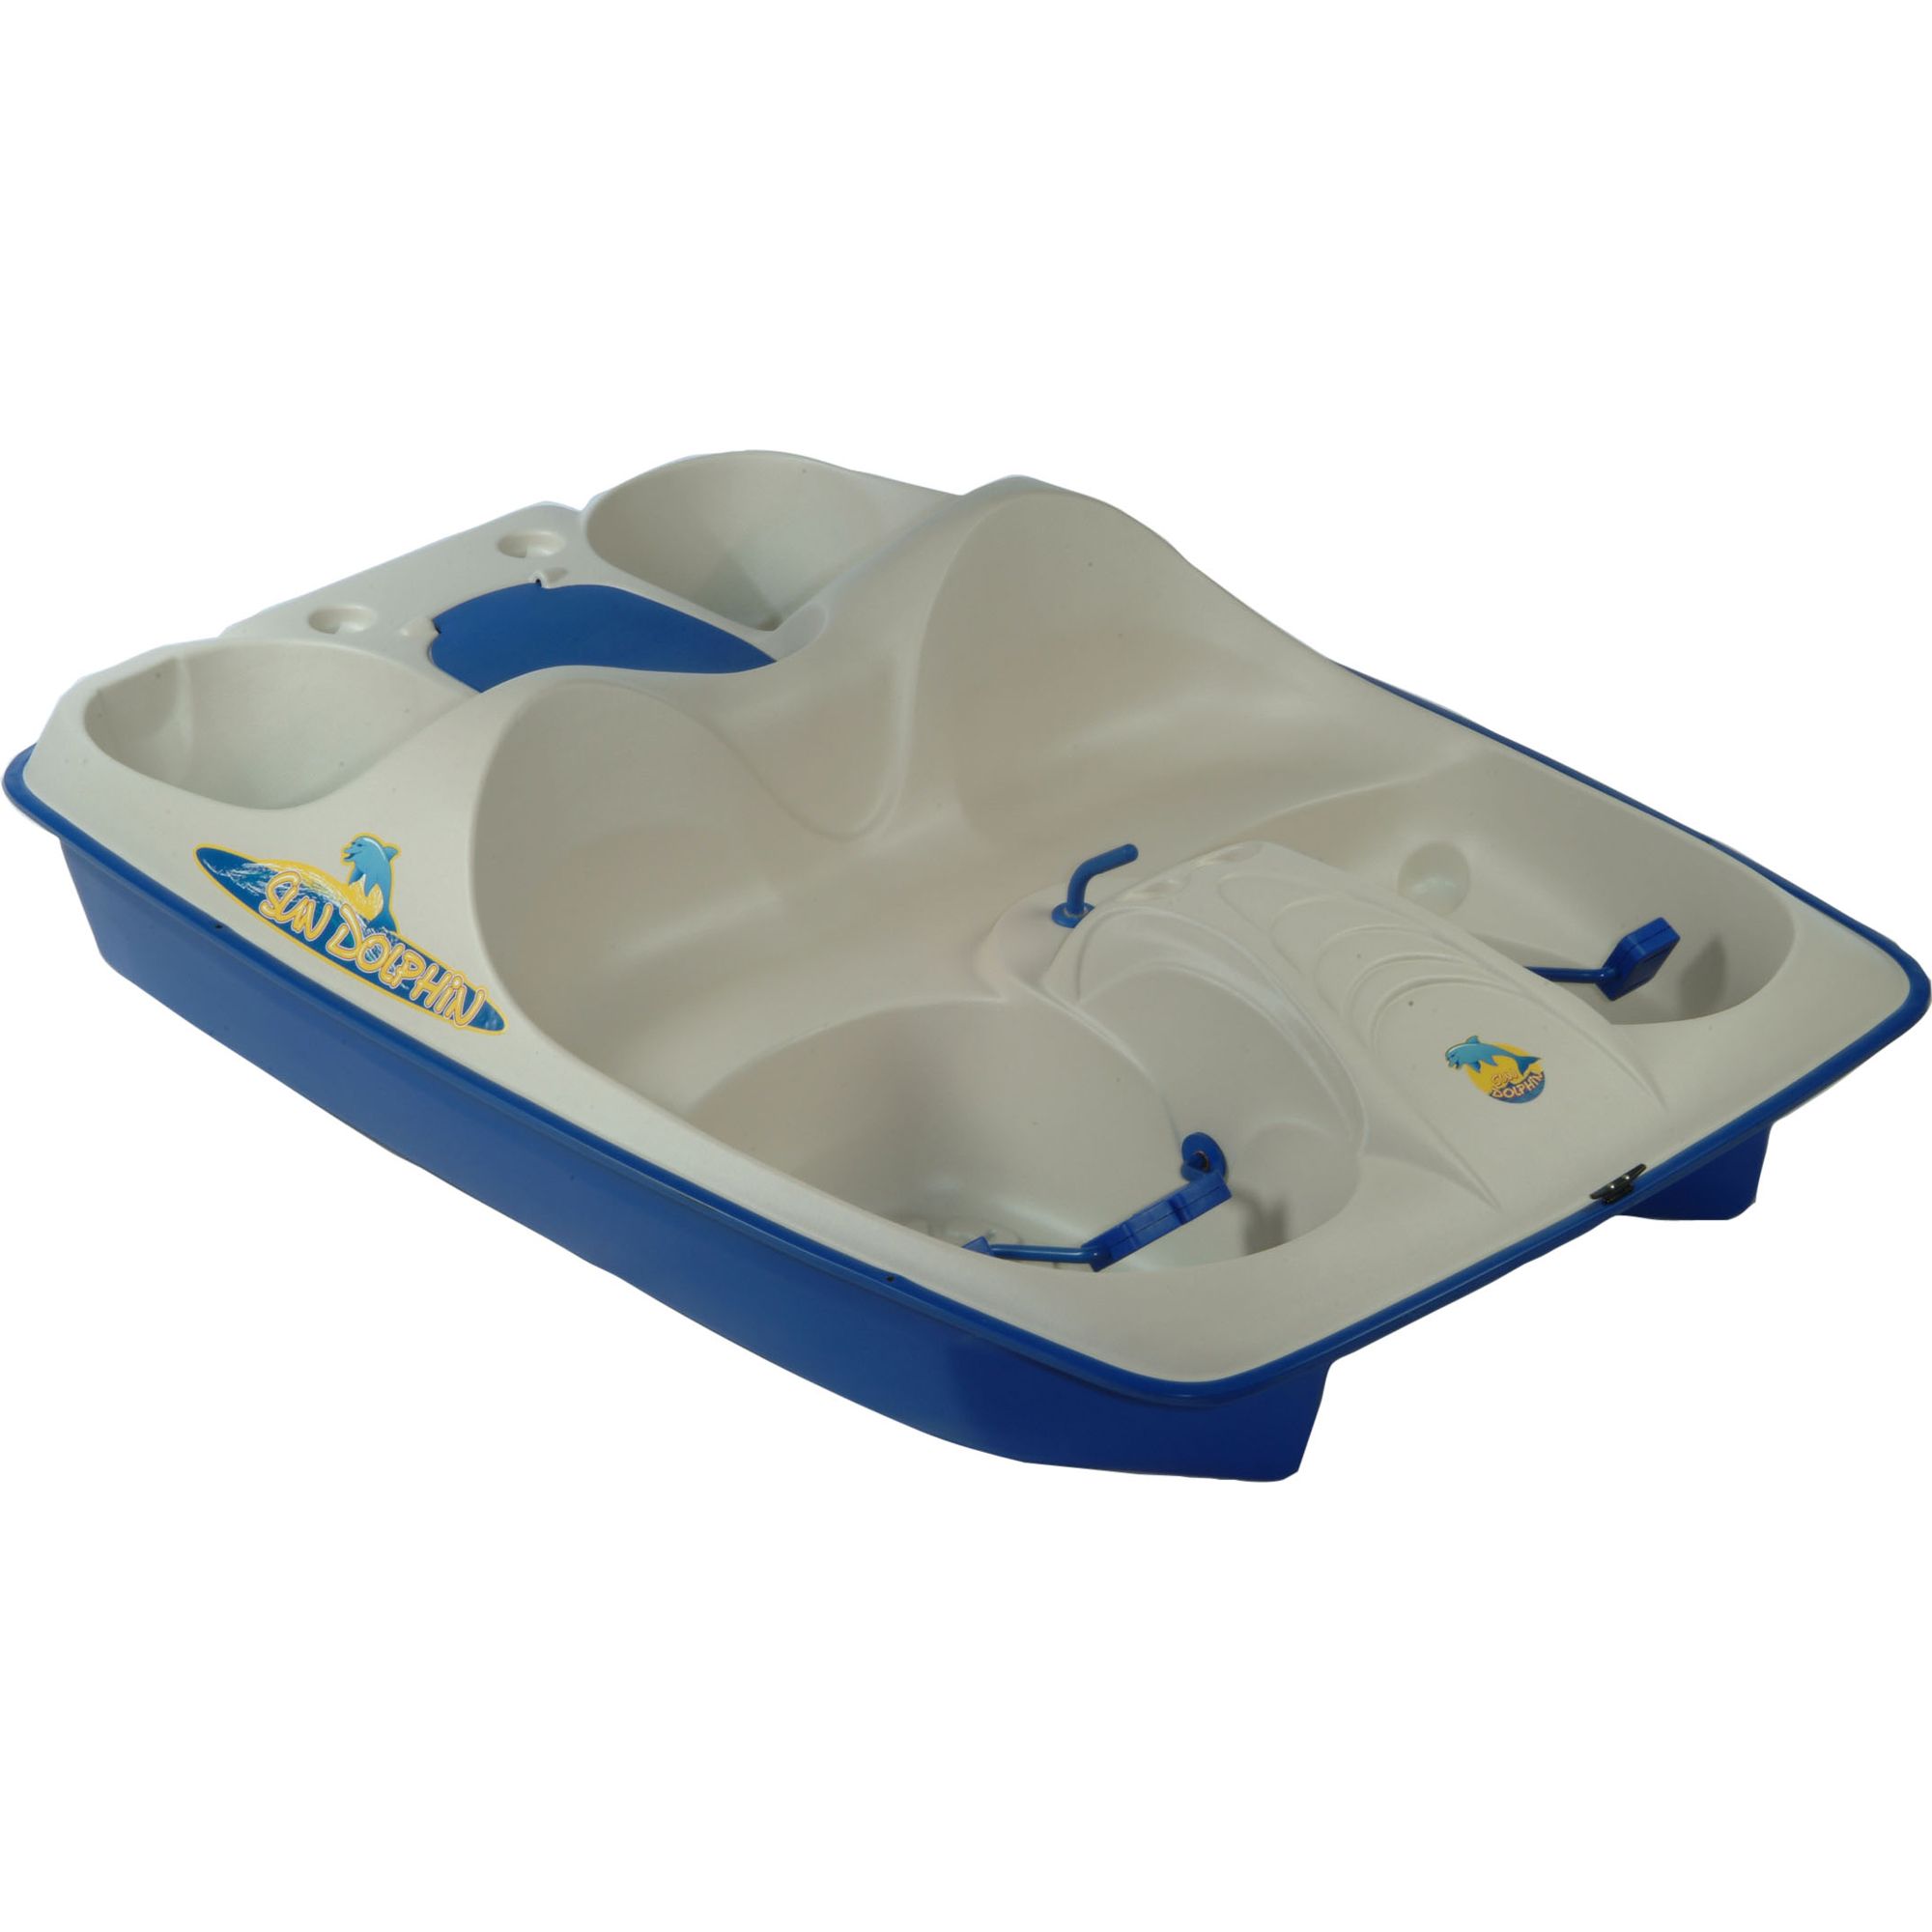 Sun Dolphin Five Person Pedal Boat Cream - Blue with Stainless Steel Packag...